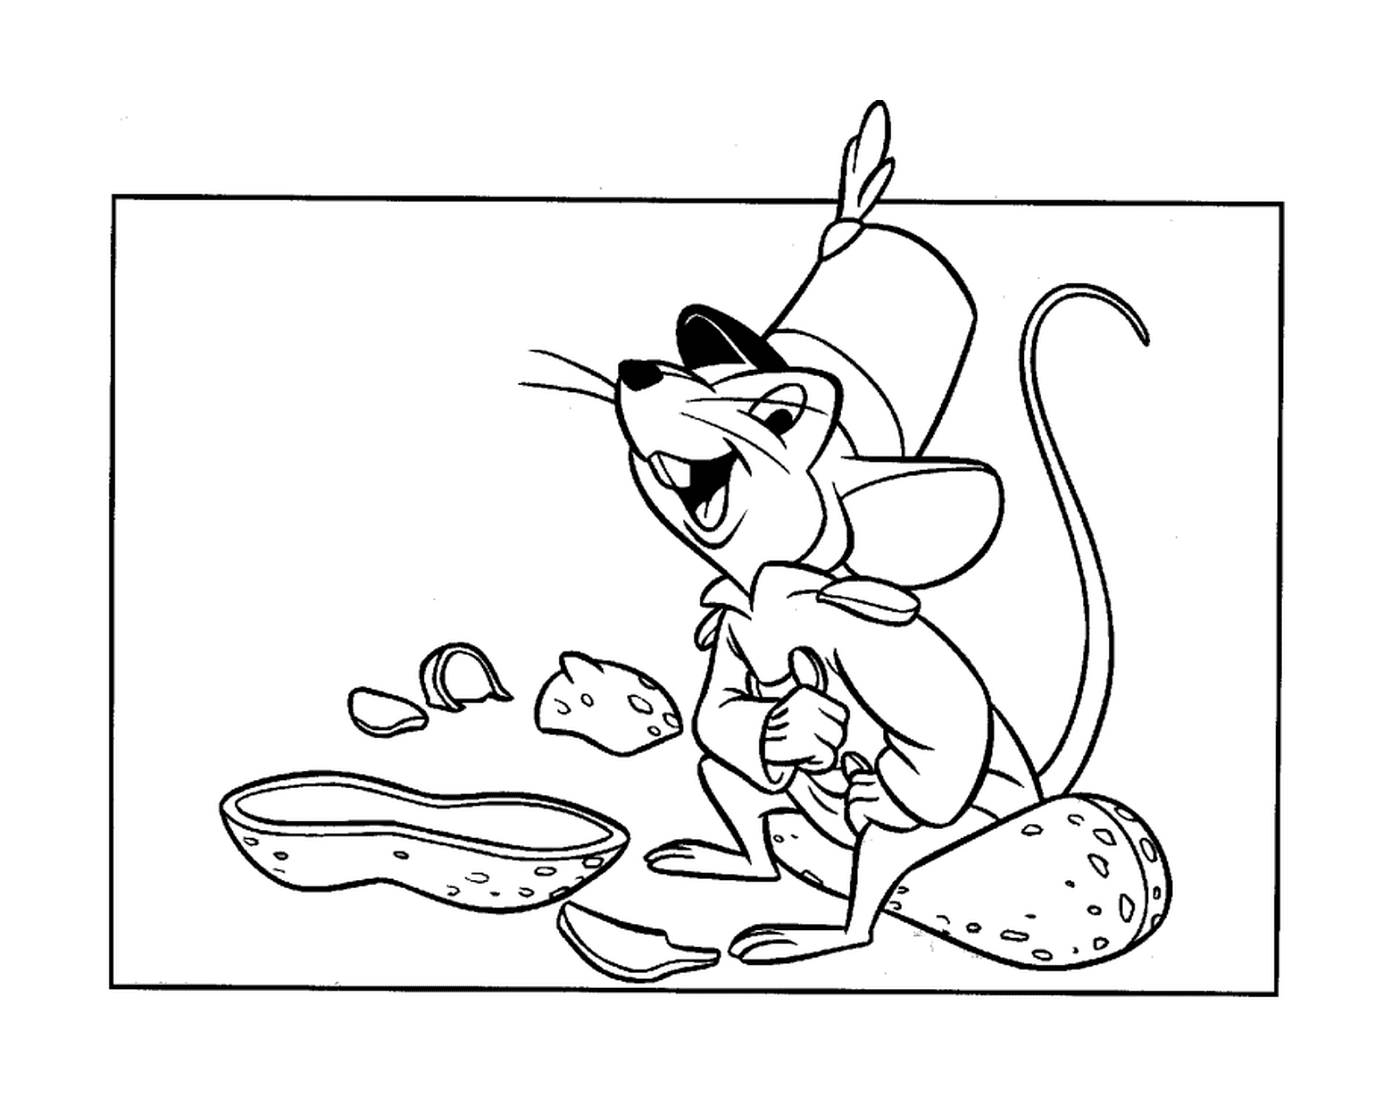  A mouse with hazelnuts 